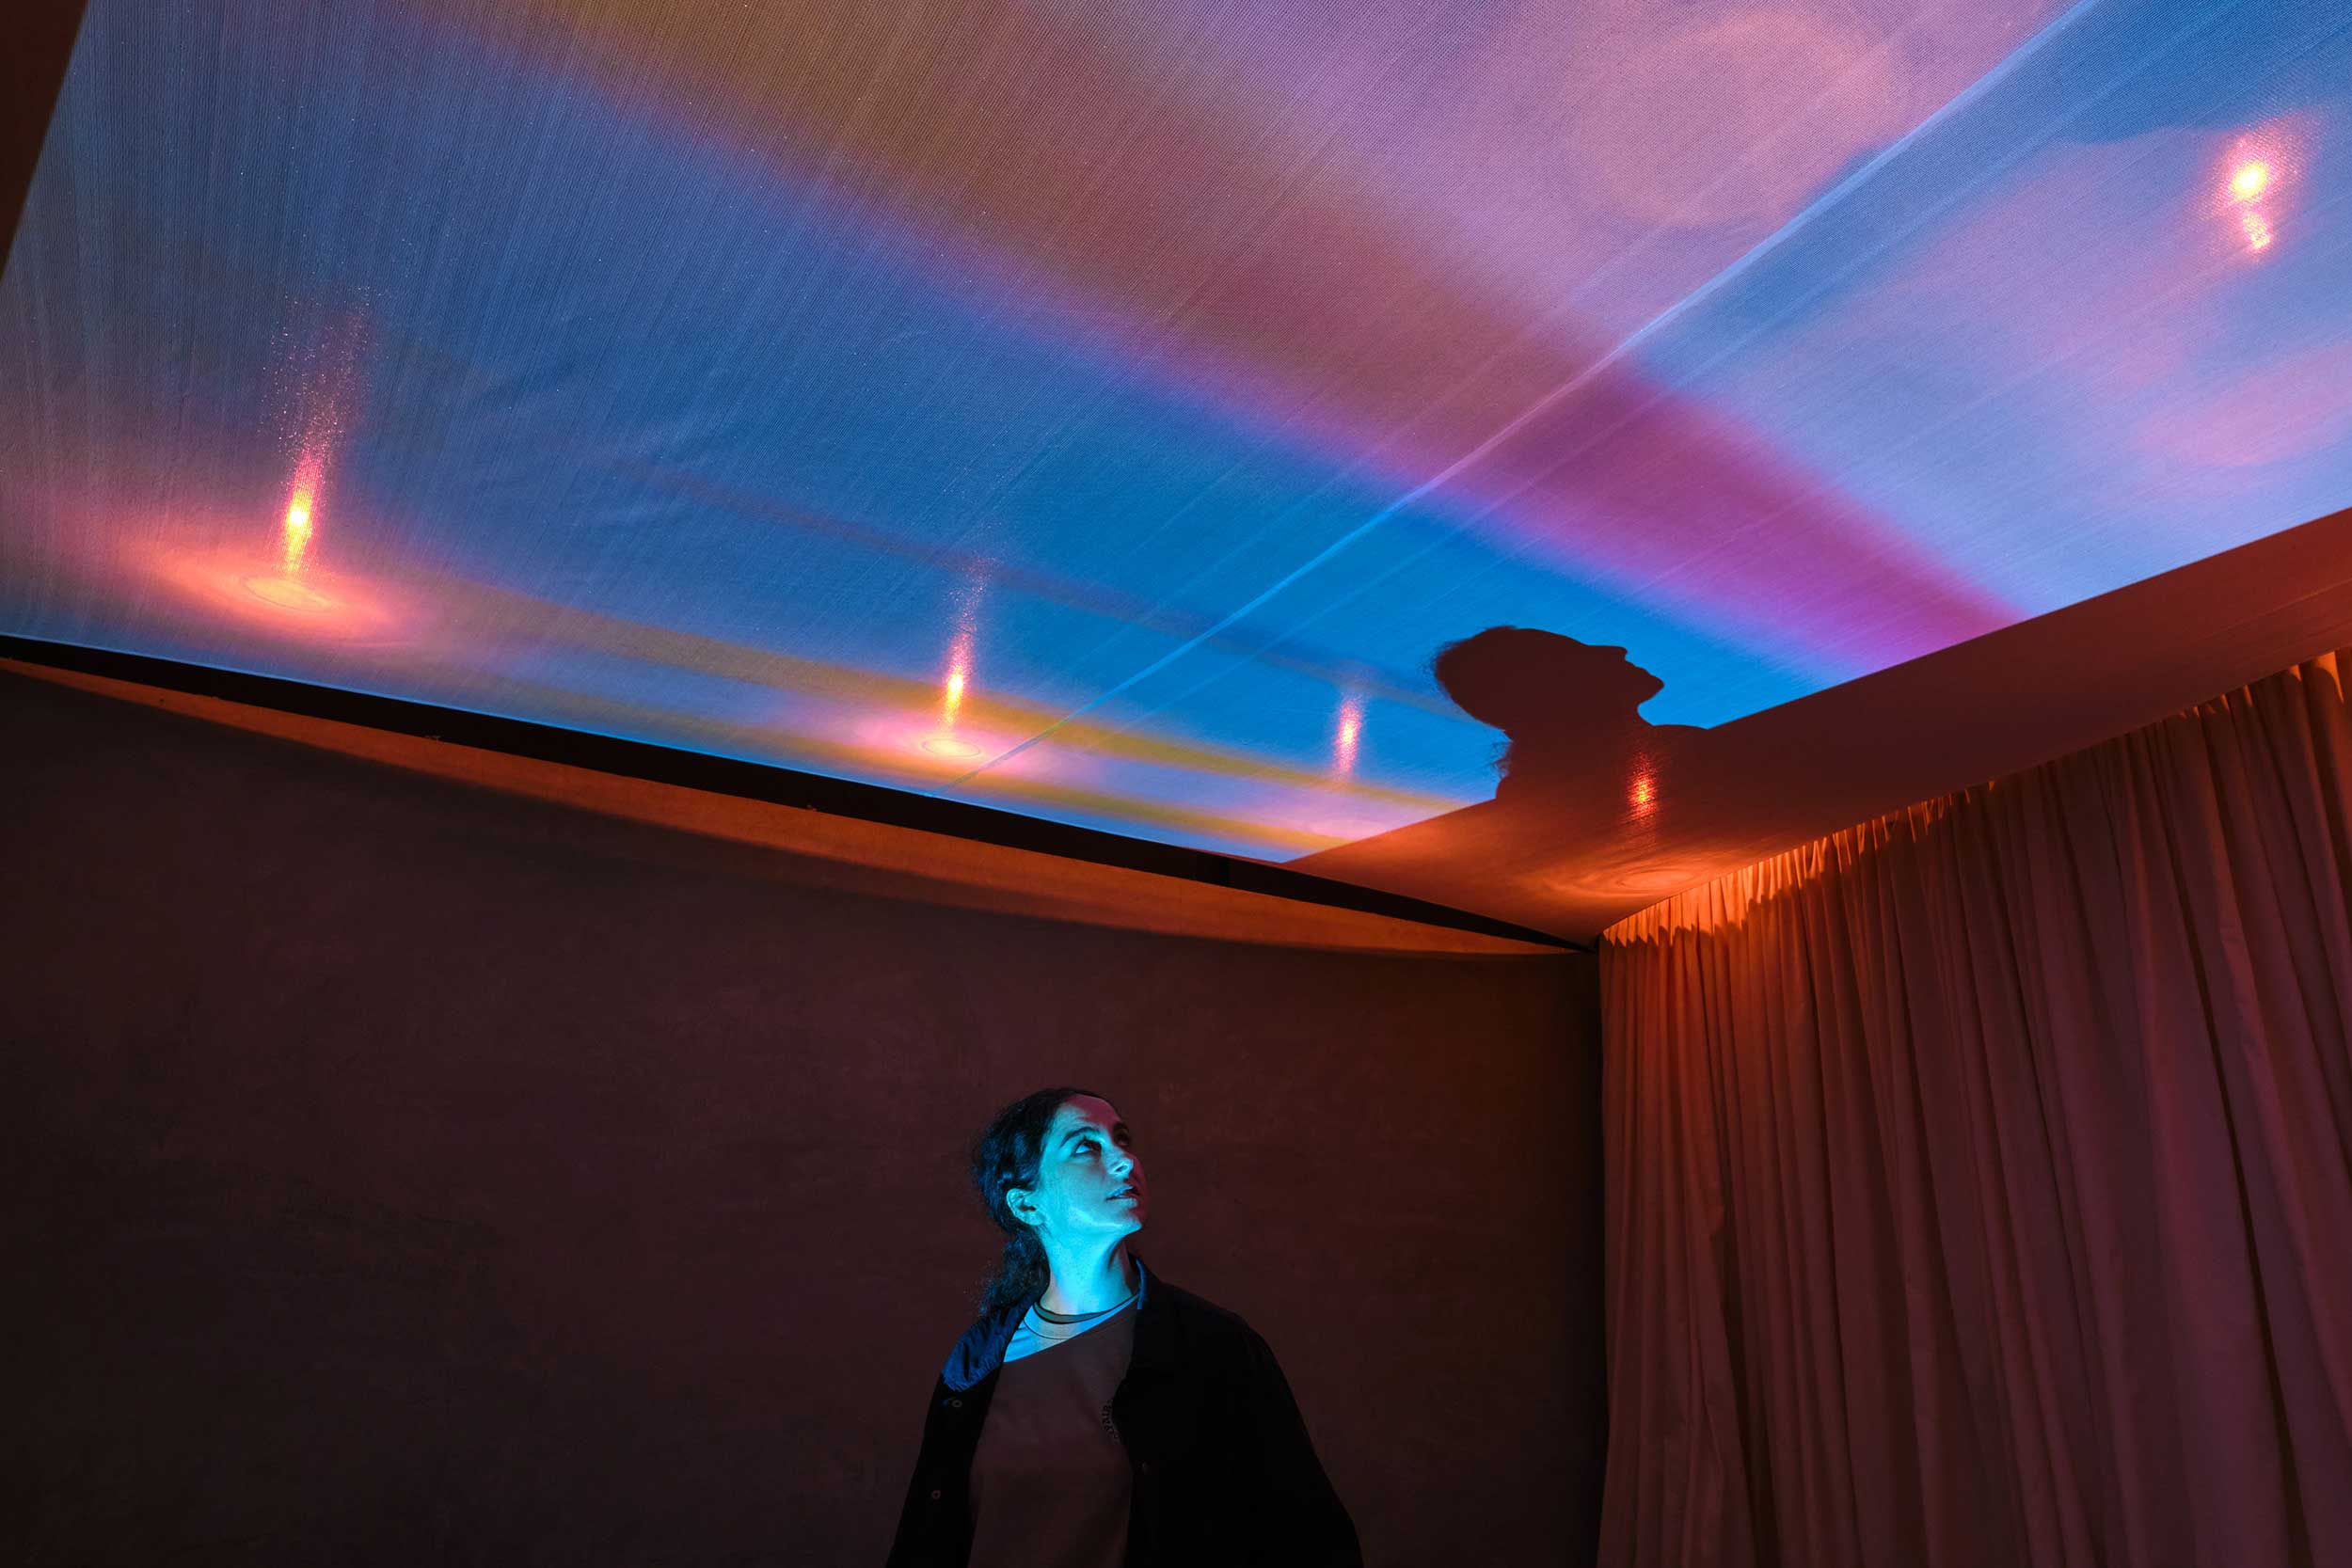 A woman stands in a dark space with her face illuminated by video projection onto the ceiling